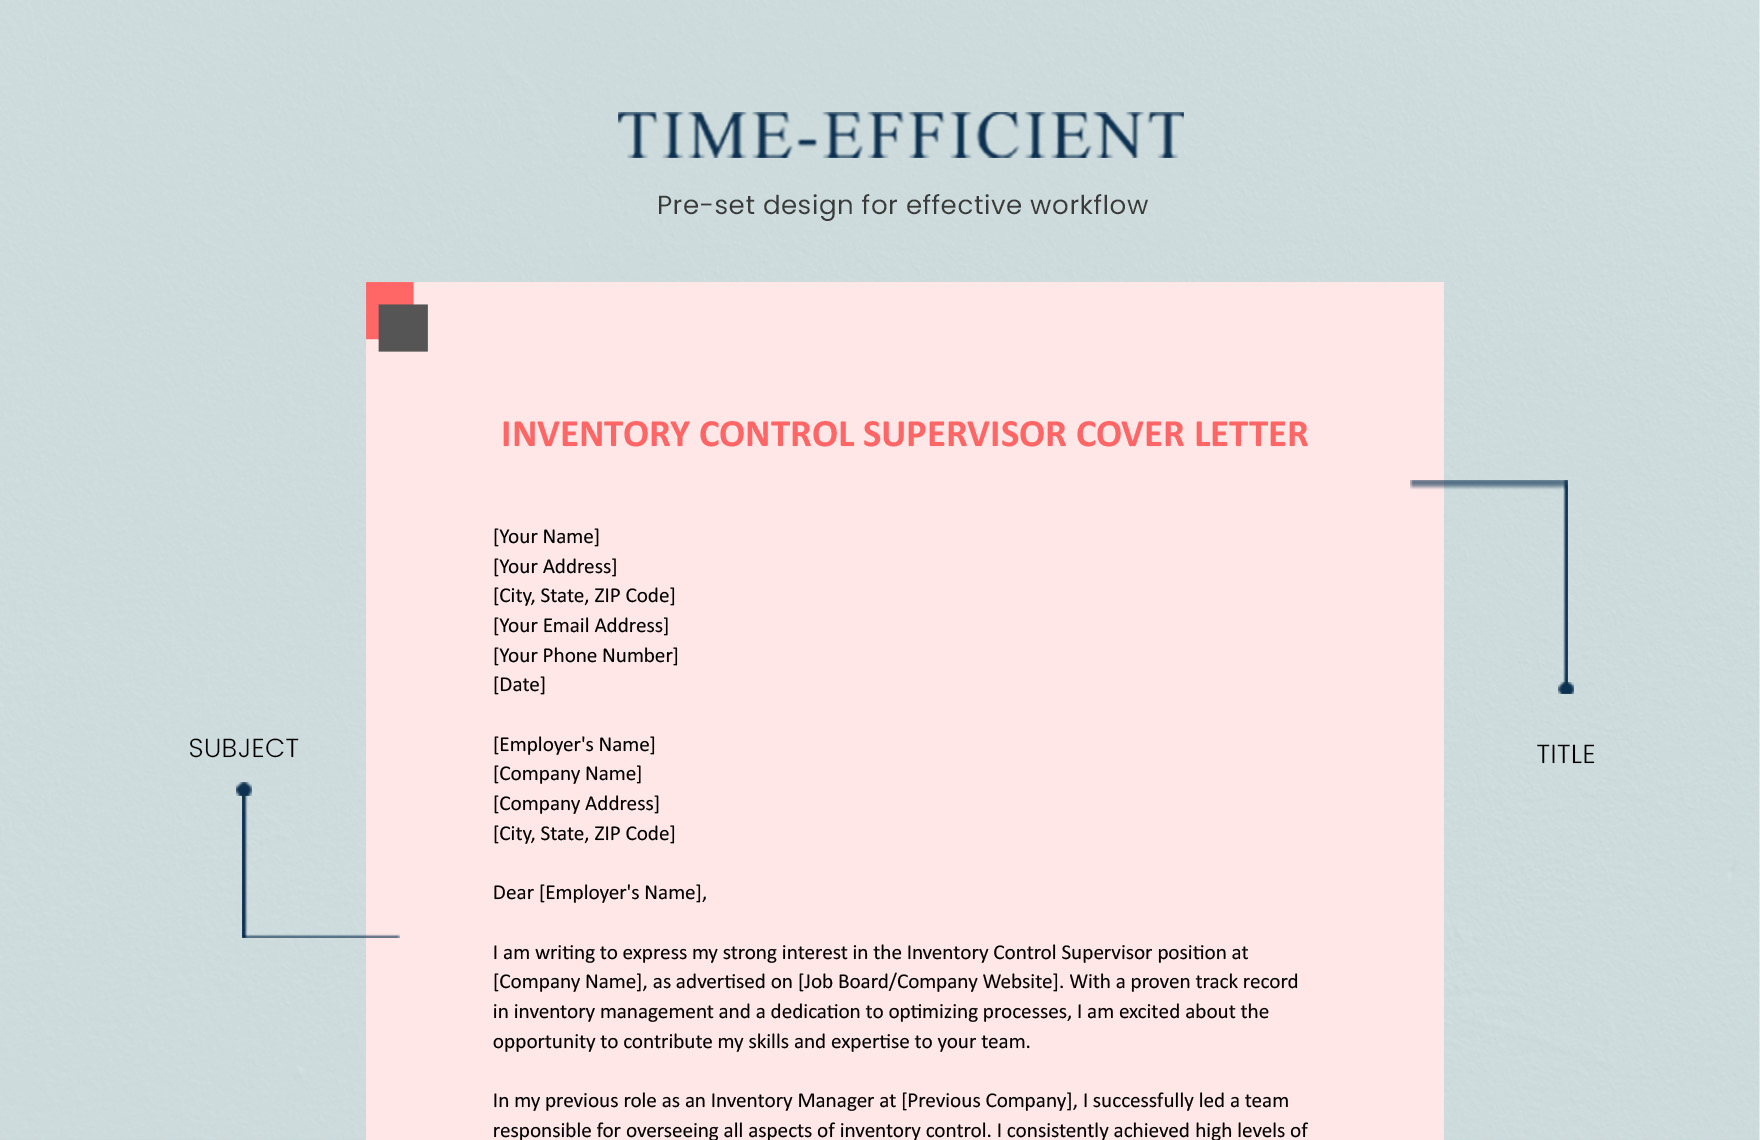 Inventory Control Supervisor Cover Letter